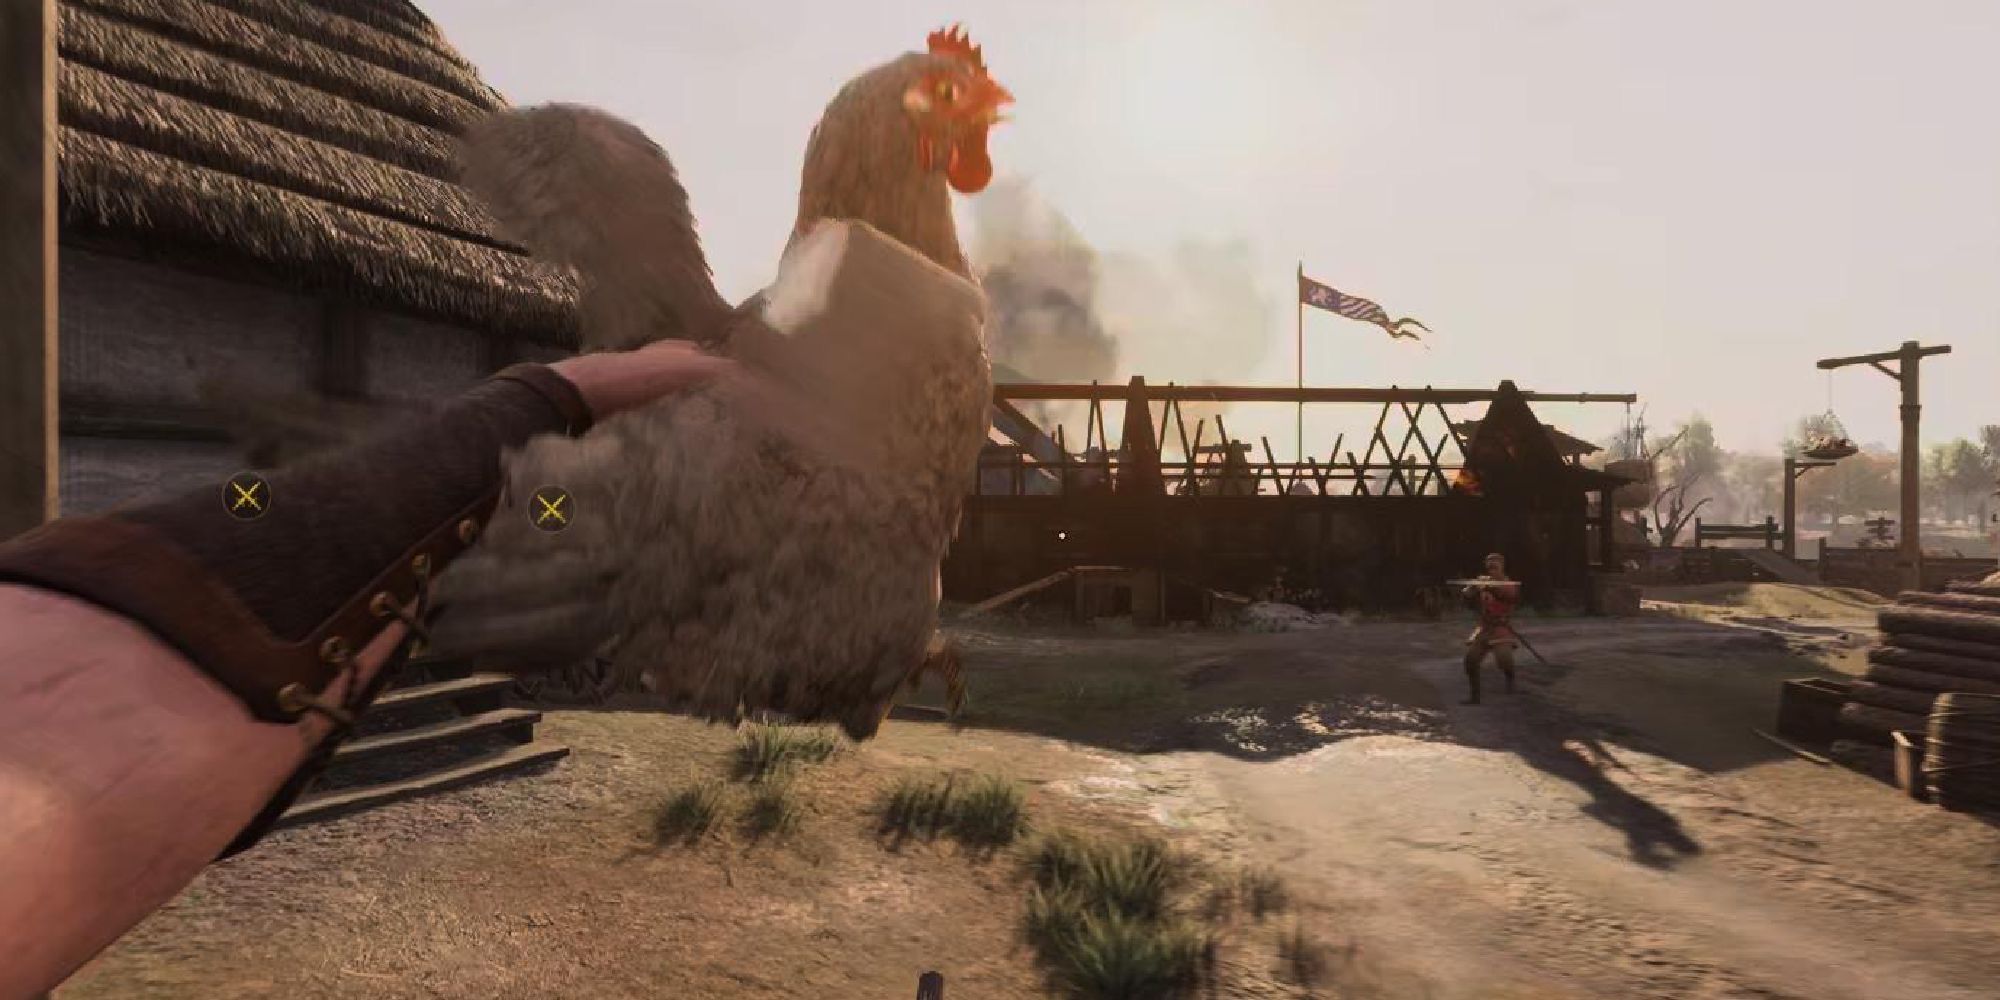 A Chivalry 2 player flourishing their chicken to a nearby opponent during a team match.